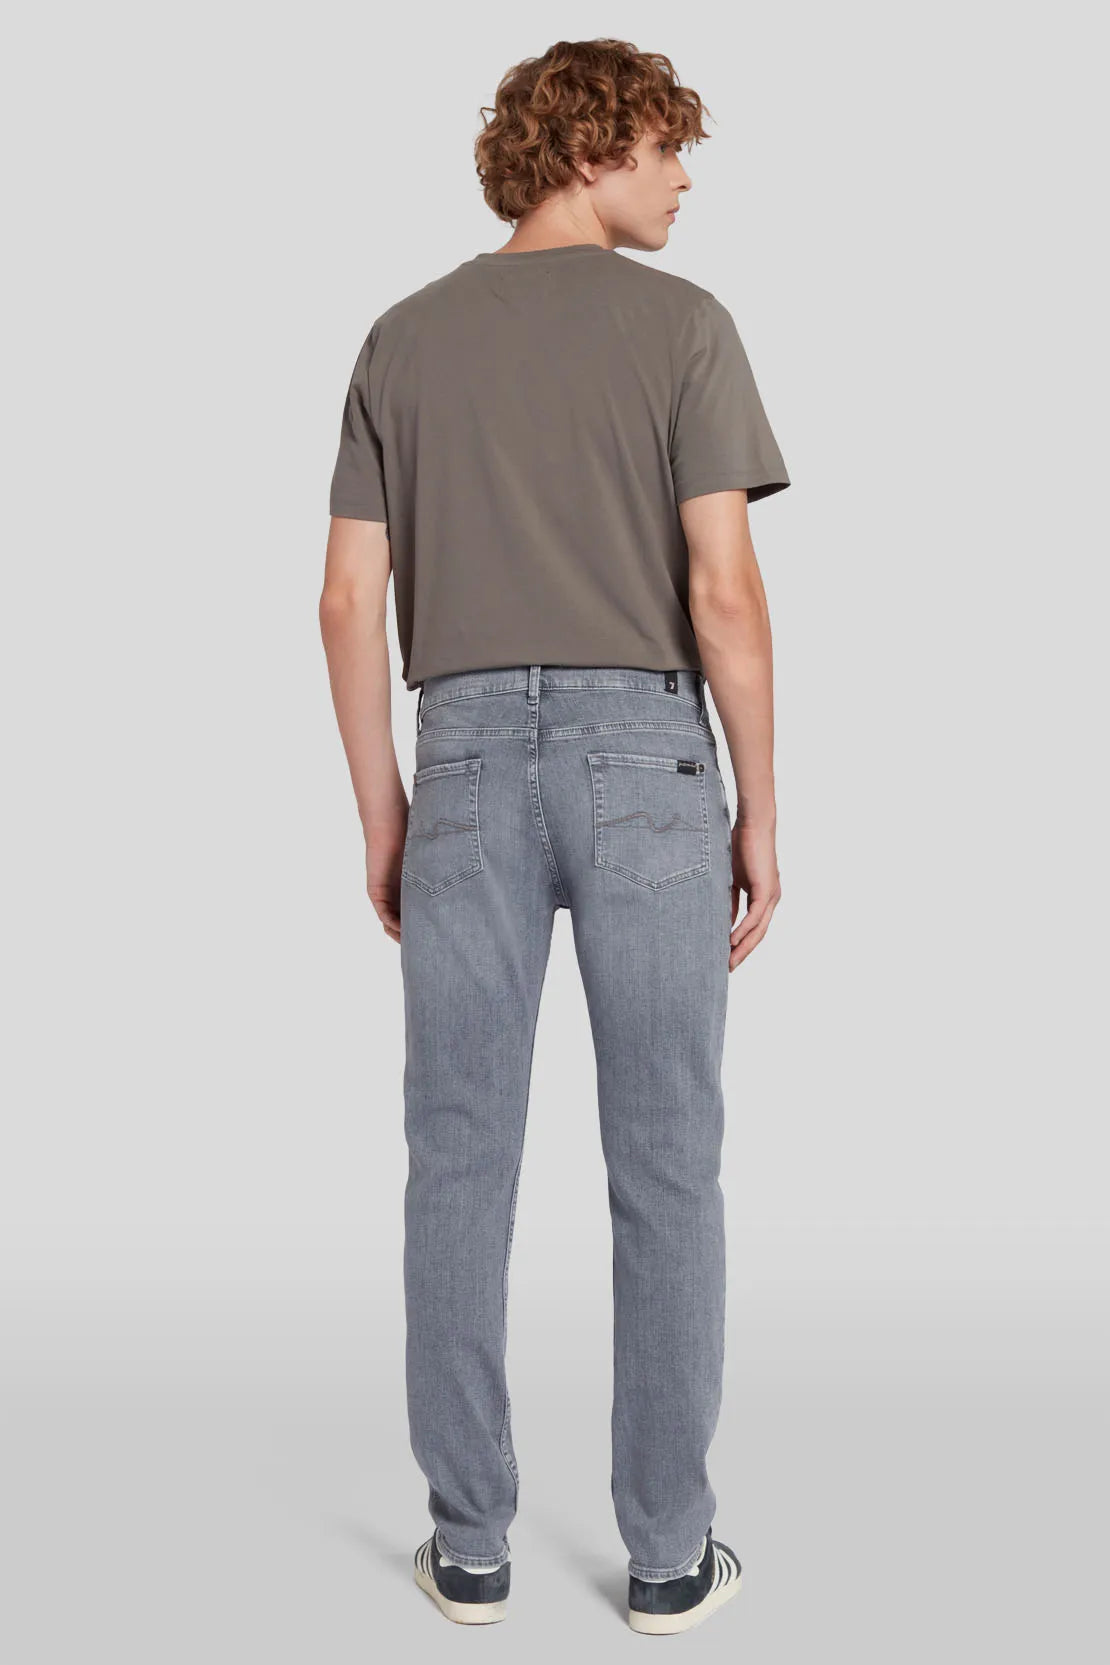 7 For All Mankind Slimmy Tapered jeans JSMXC110NT - GREY